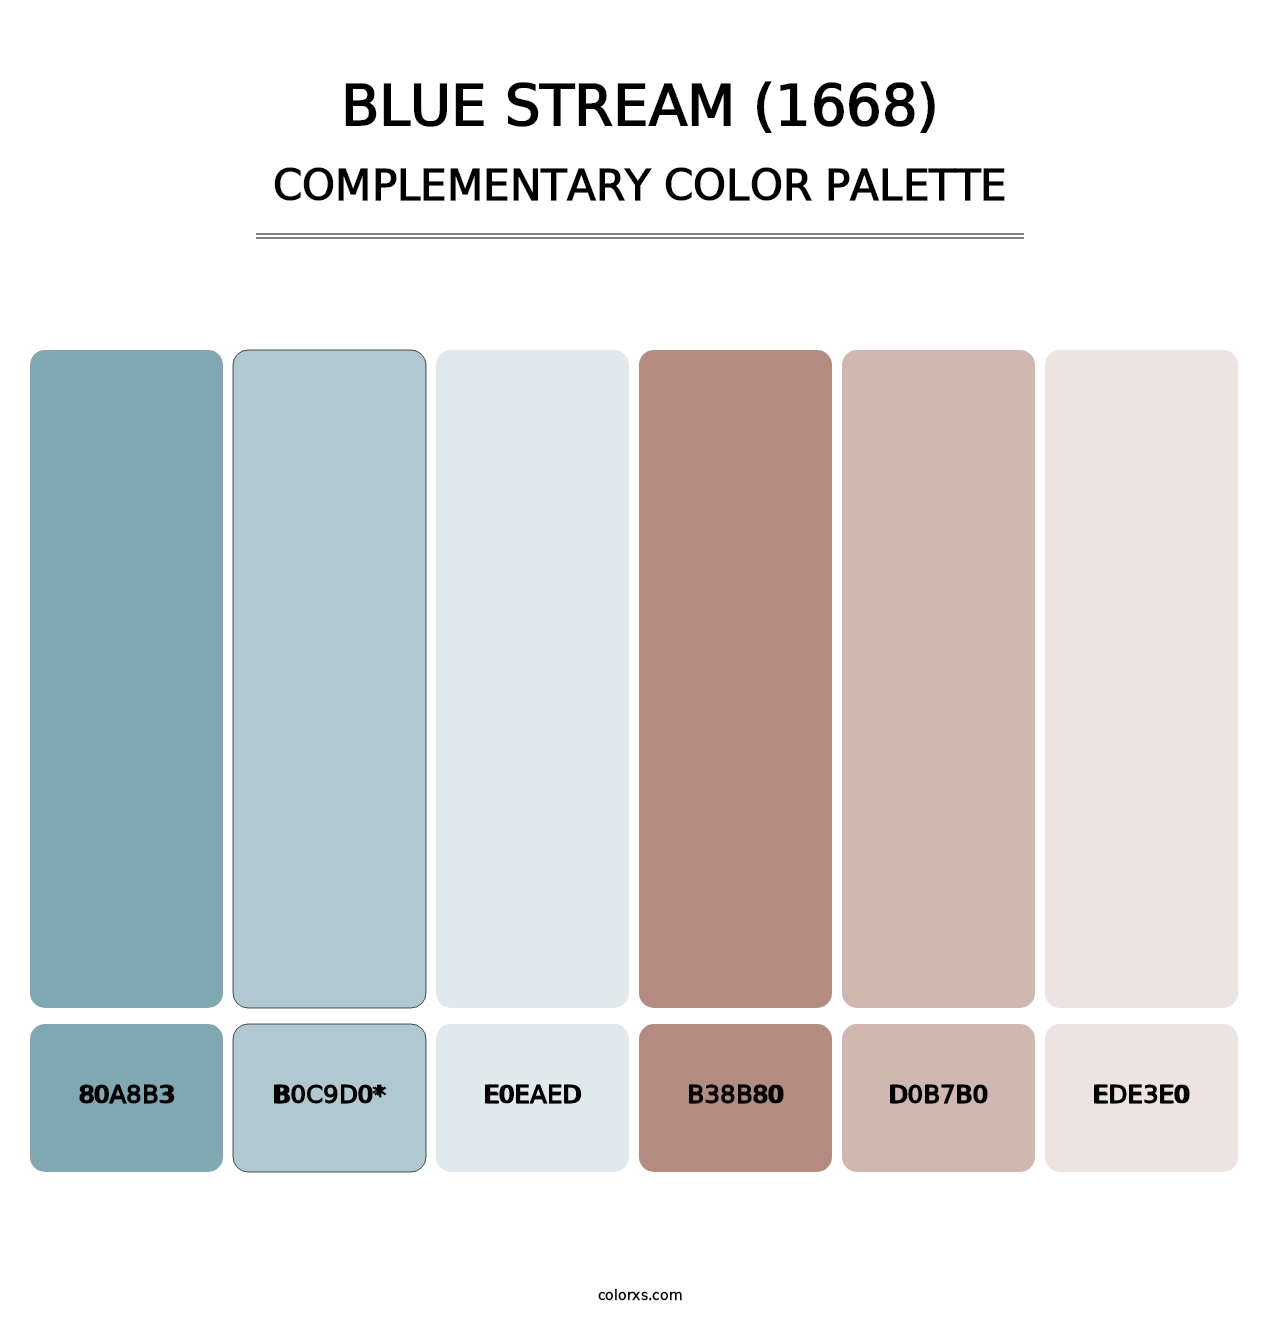 Blue Stream (1668) - Complementary Color Palette